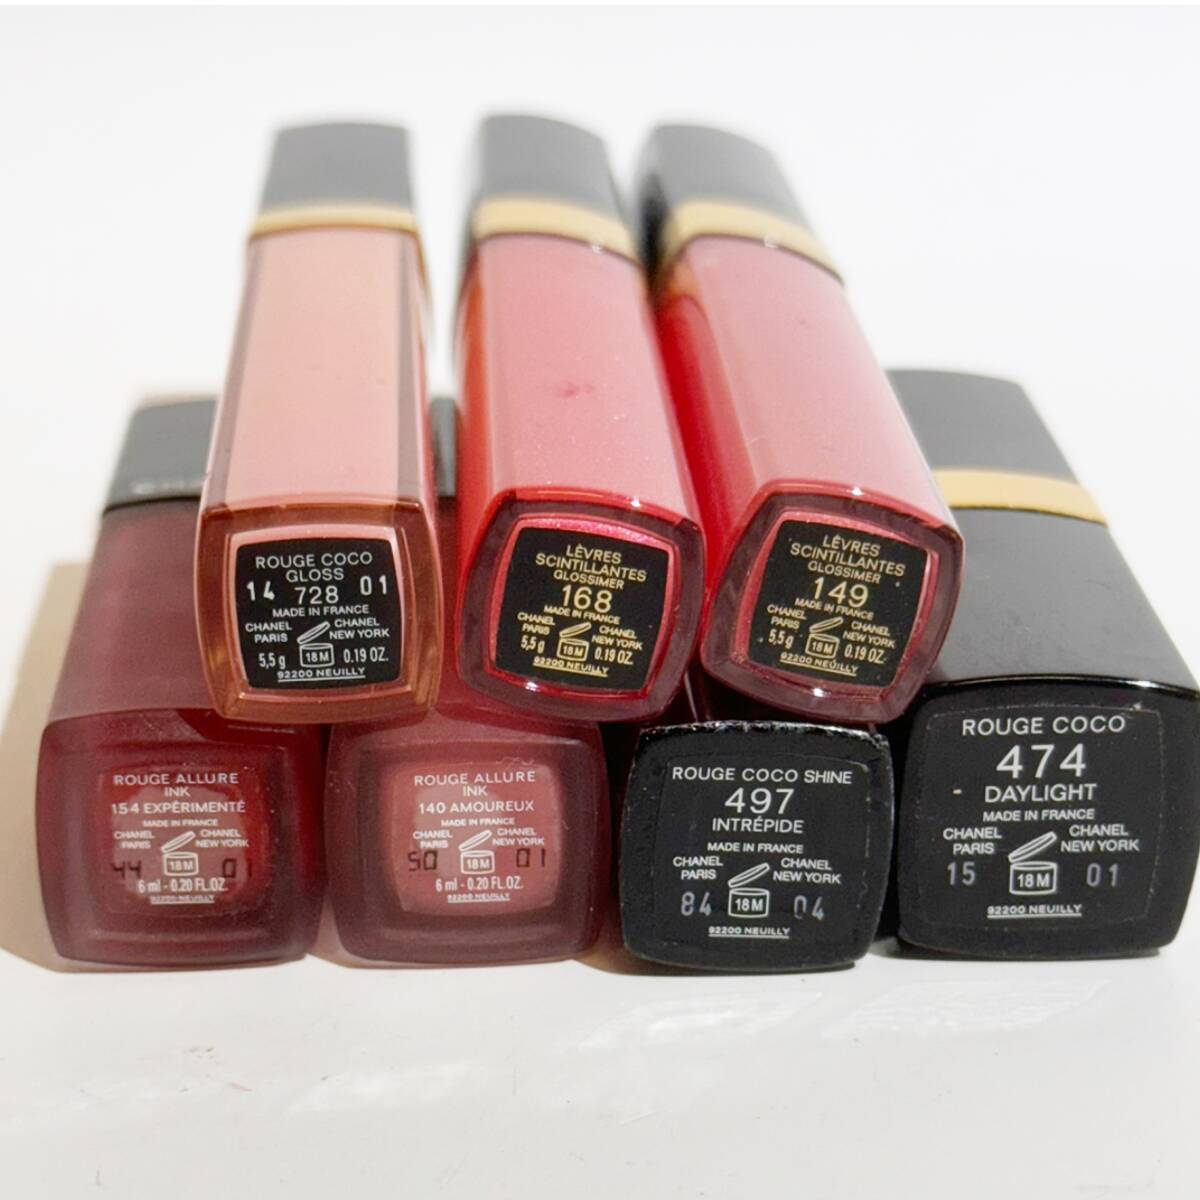 CHANEL Chanel * lipstick, lip gloss 7 pcs set * rouge here car in, rouge Allure ink, rouge here gloss 